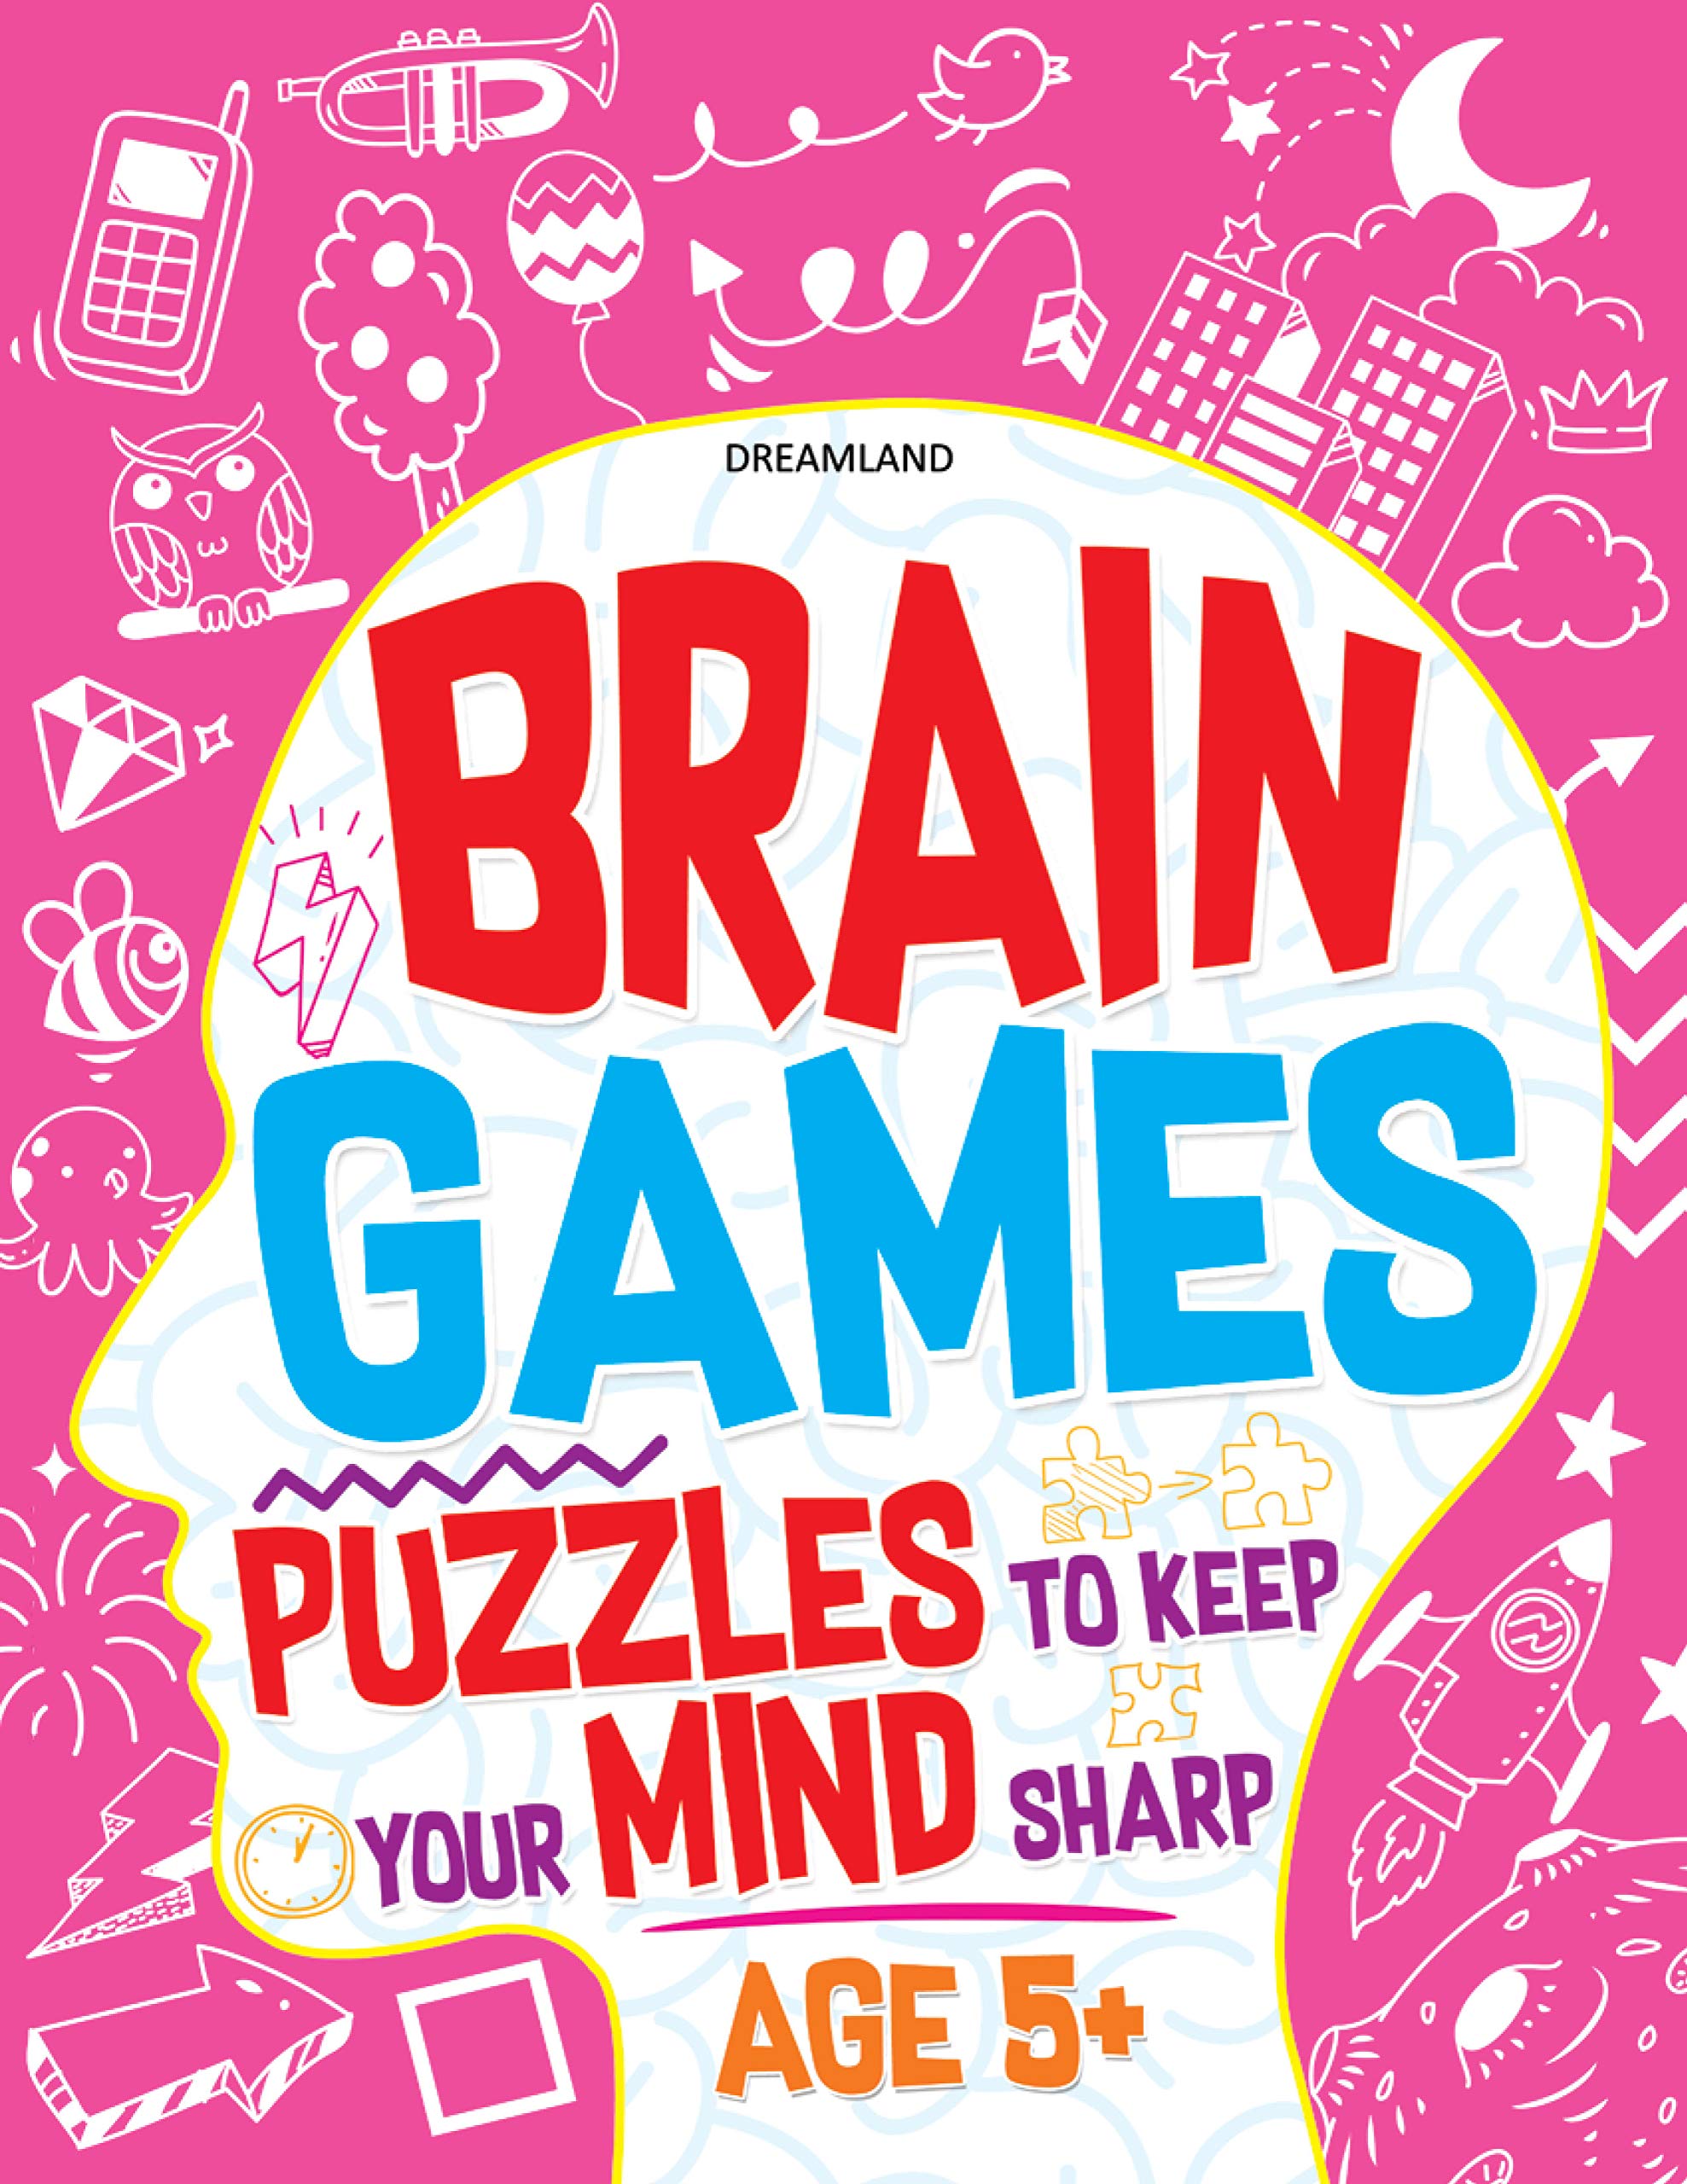 Brain Games (Puzzles to keep your Mind sharp Age 5+)